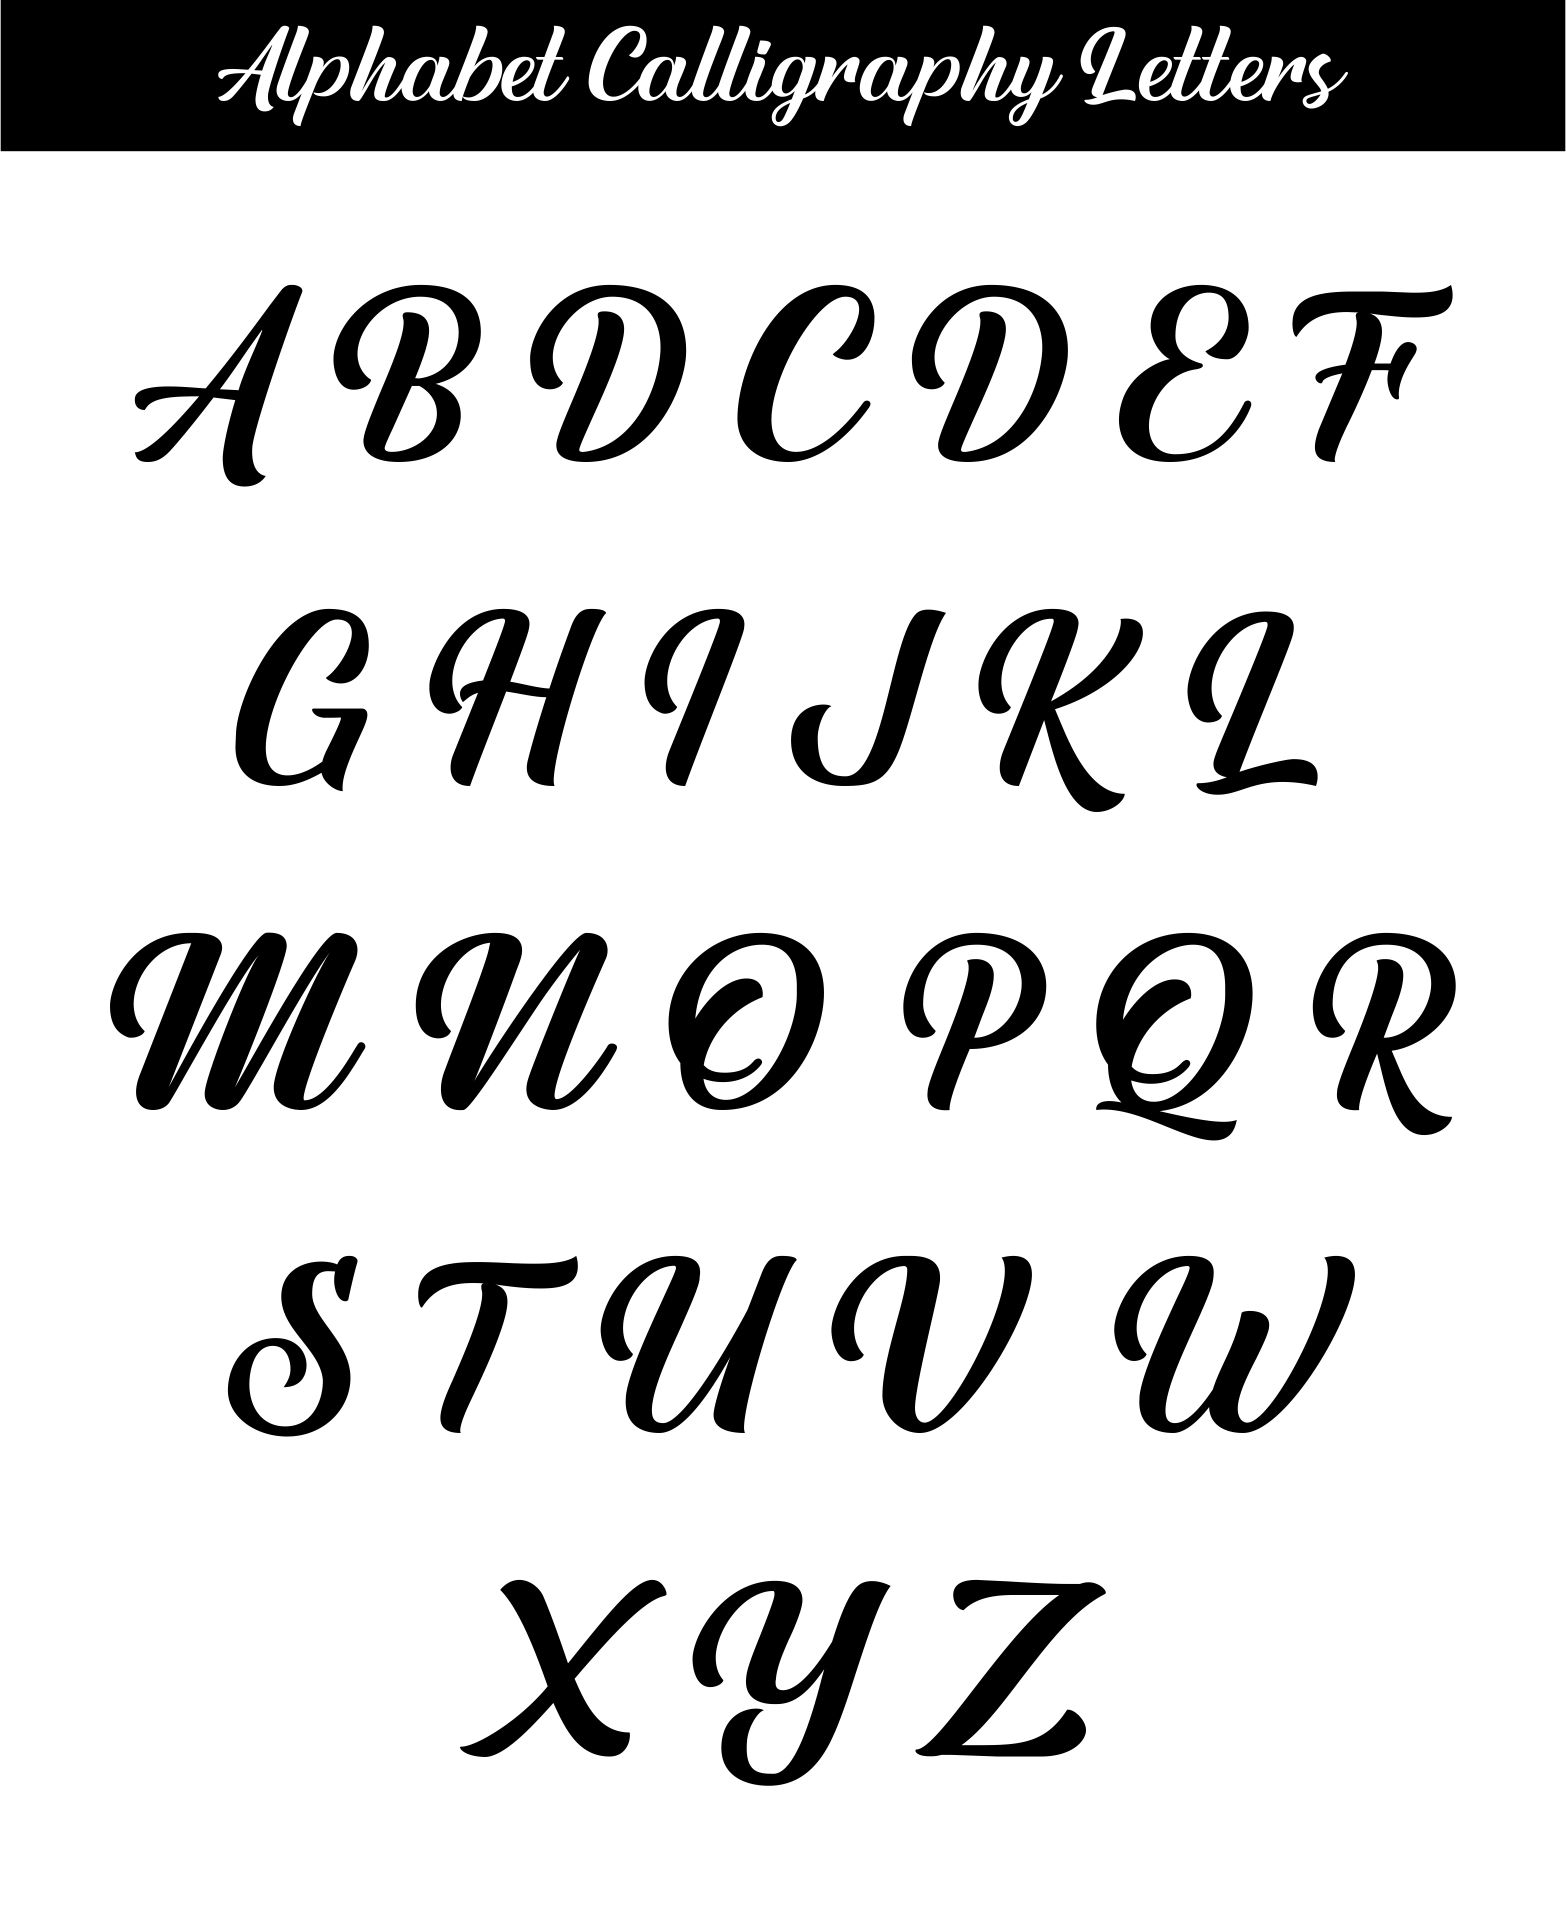 Printable Alphabet Calligraphy Letters Stencil